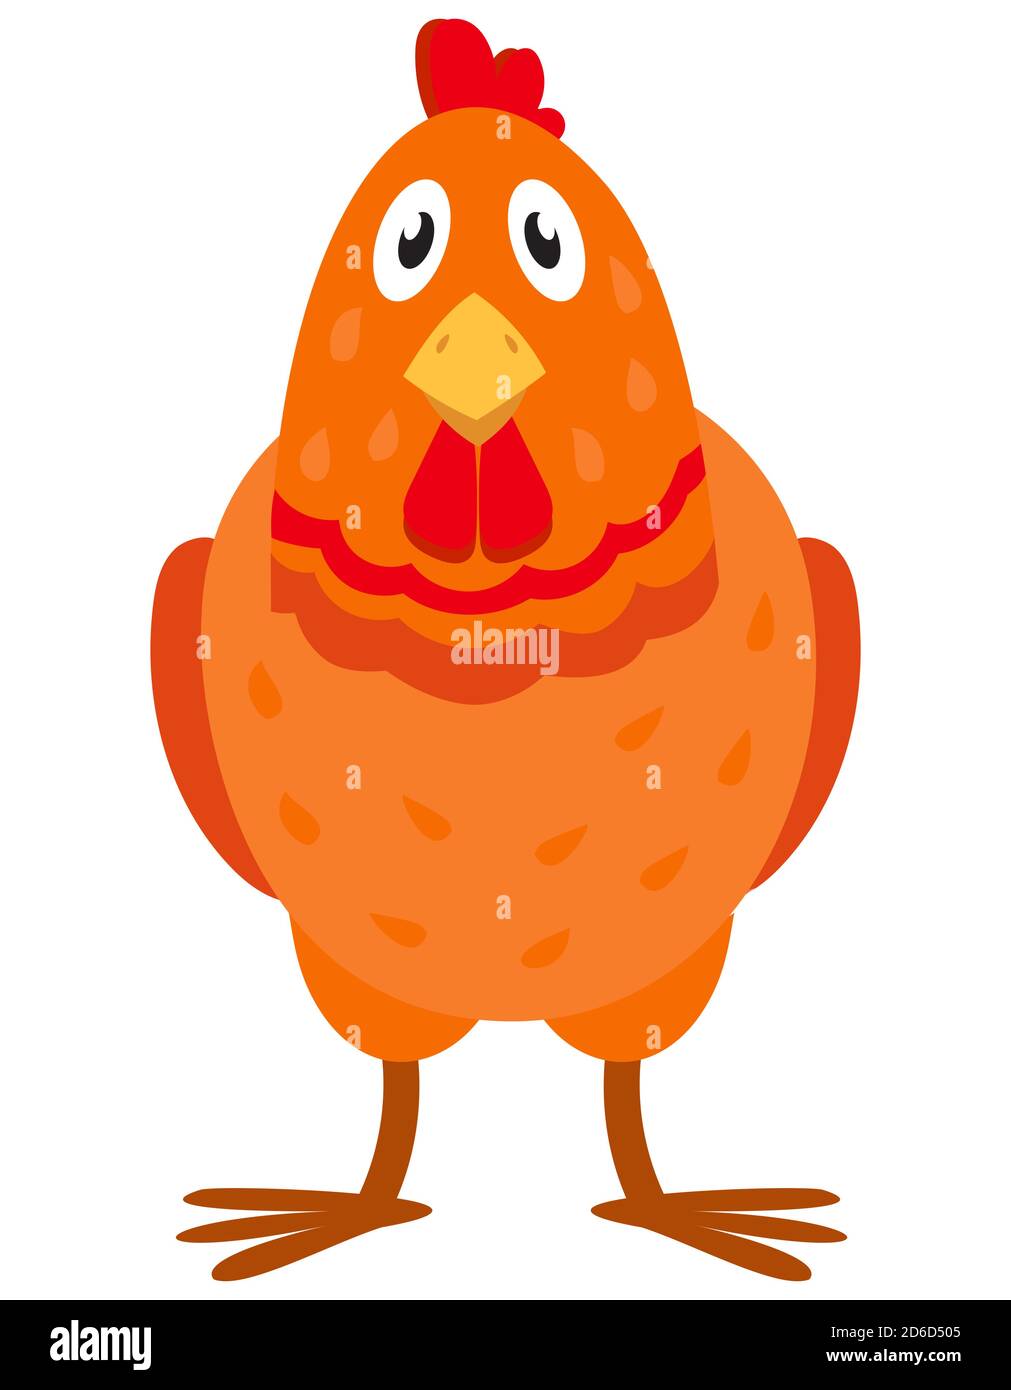 Hen front view. Farm animal in cartoon style. Stock Vector